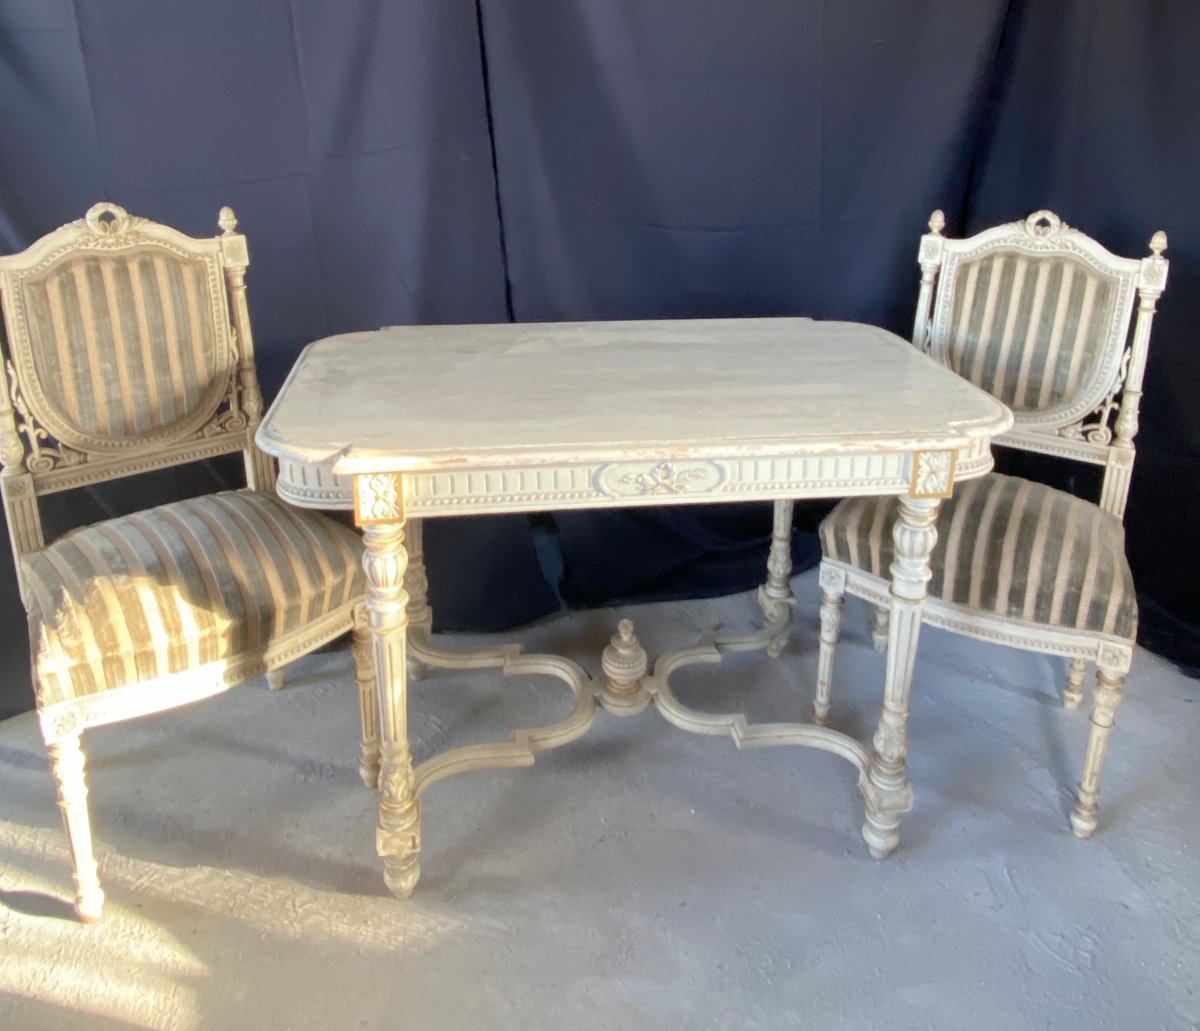 Napoleon III Pedestal Table And Chairs Set Dating From The 19th Century 